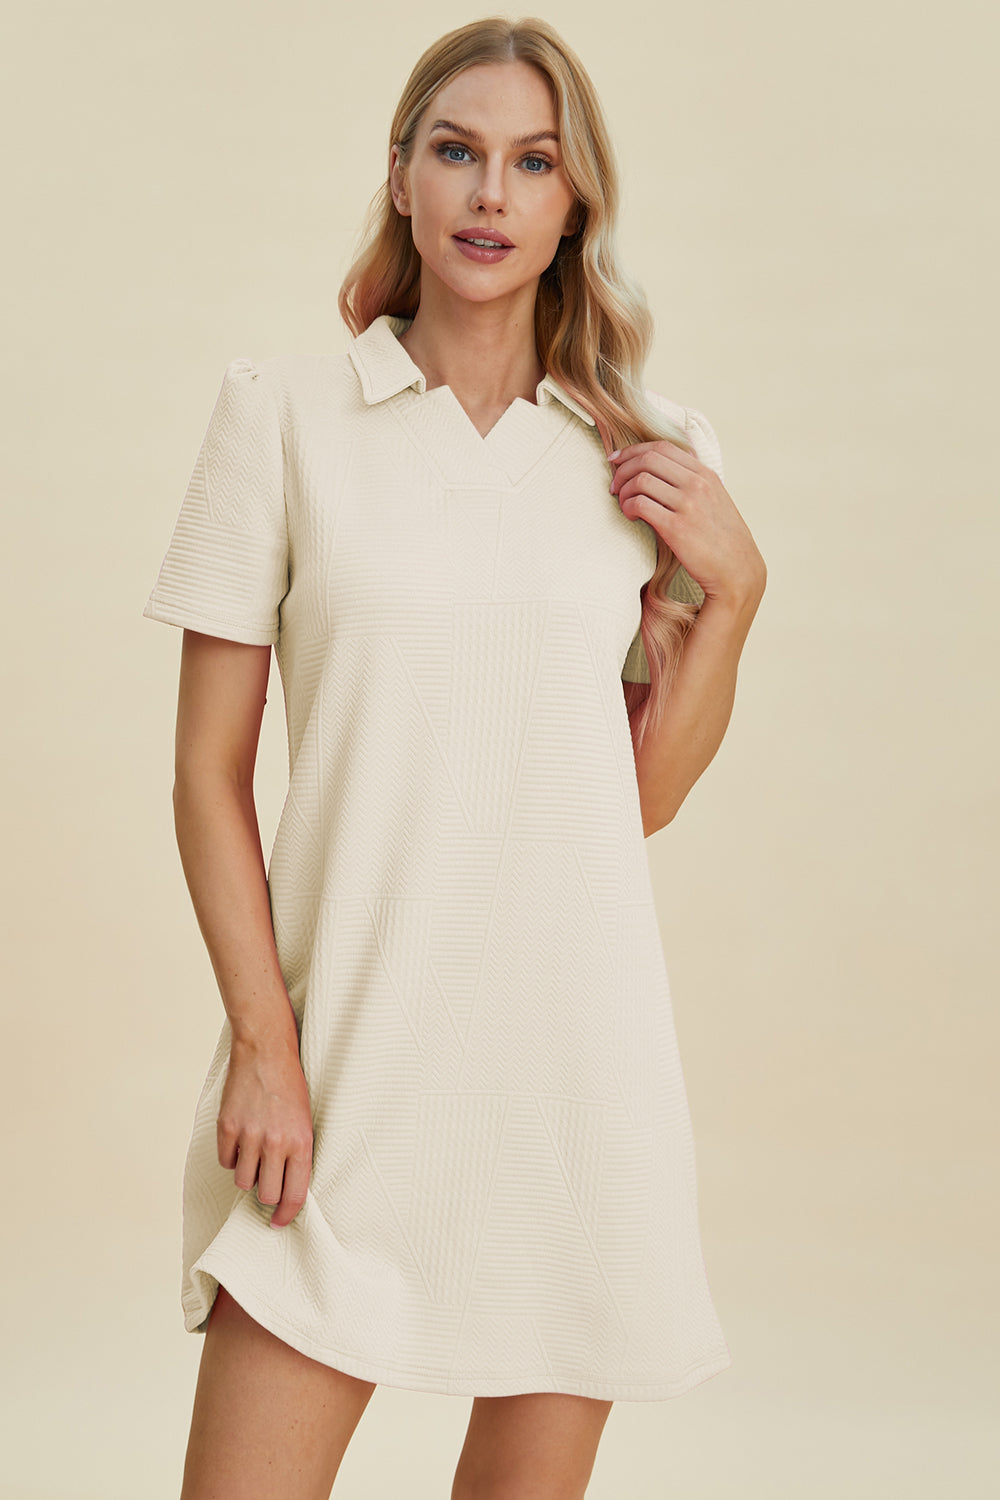 Ivory textured dress with short sleeves and collar